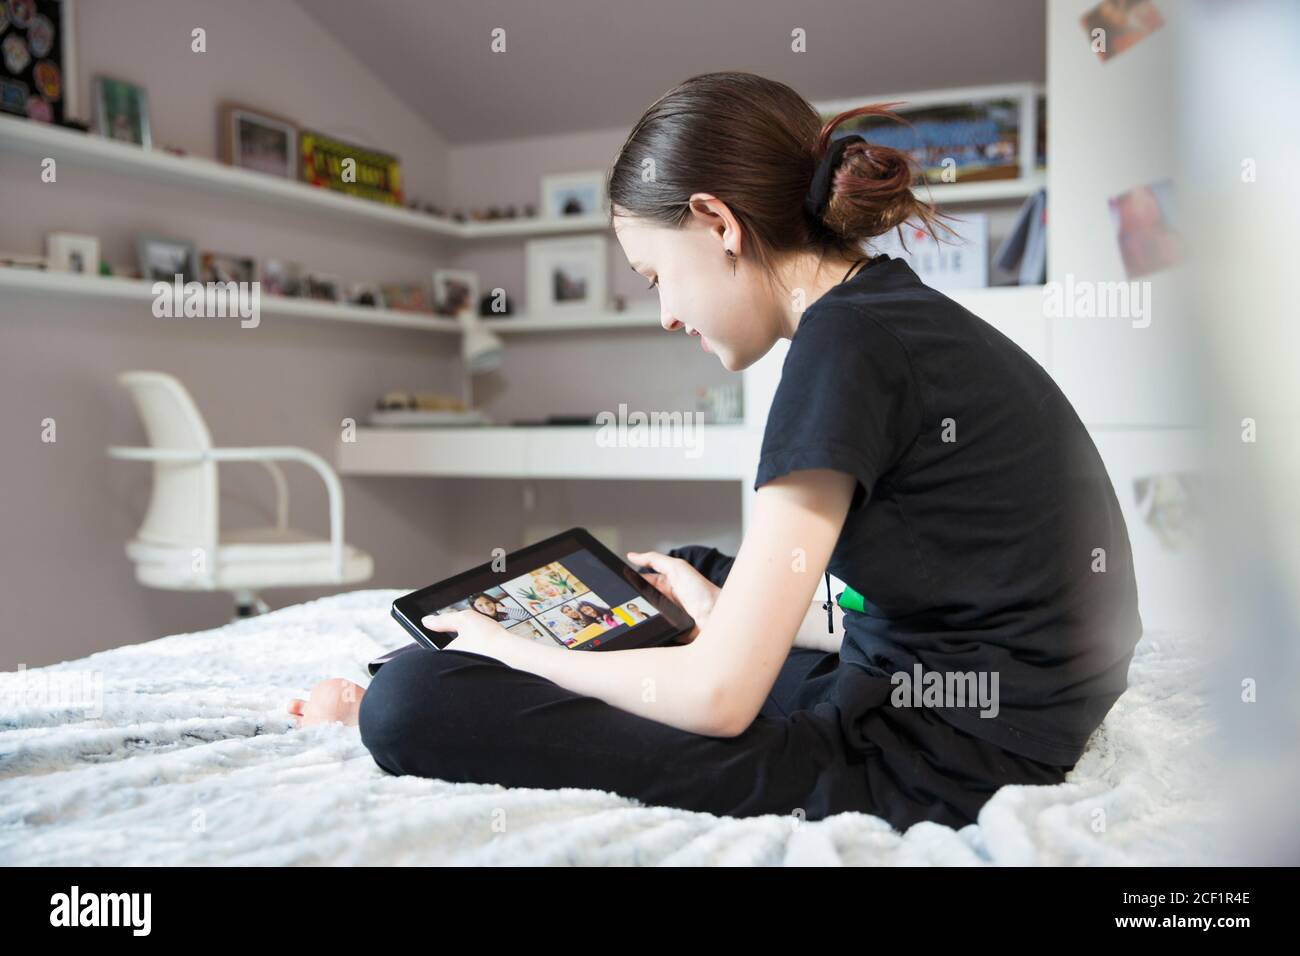 Girl e-learning with digital tablet on bed Stock Photo